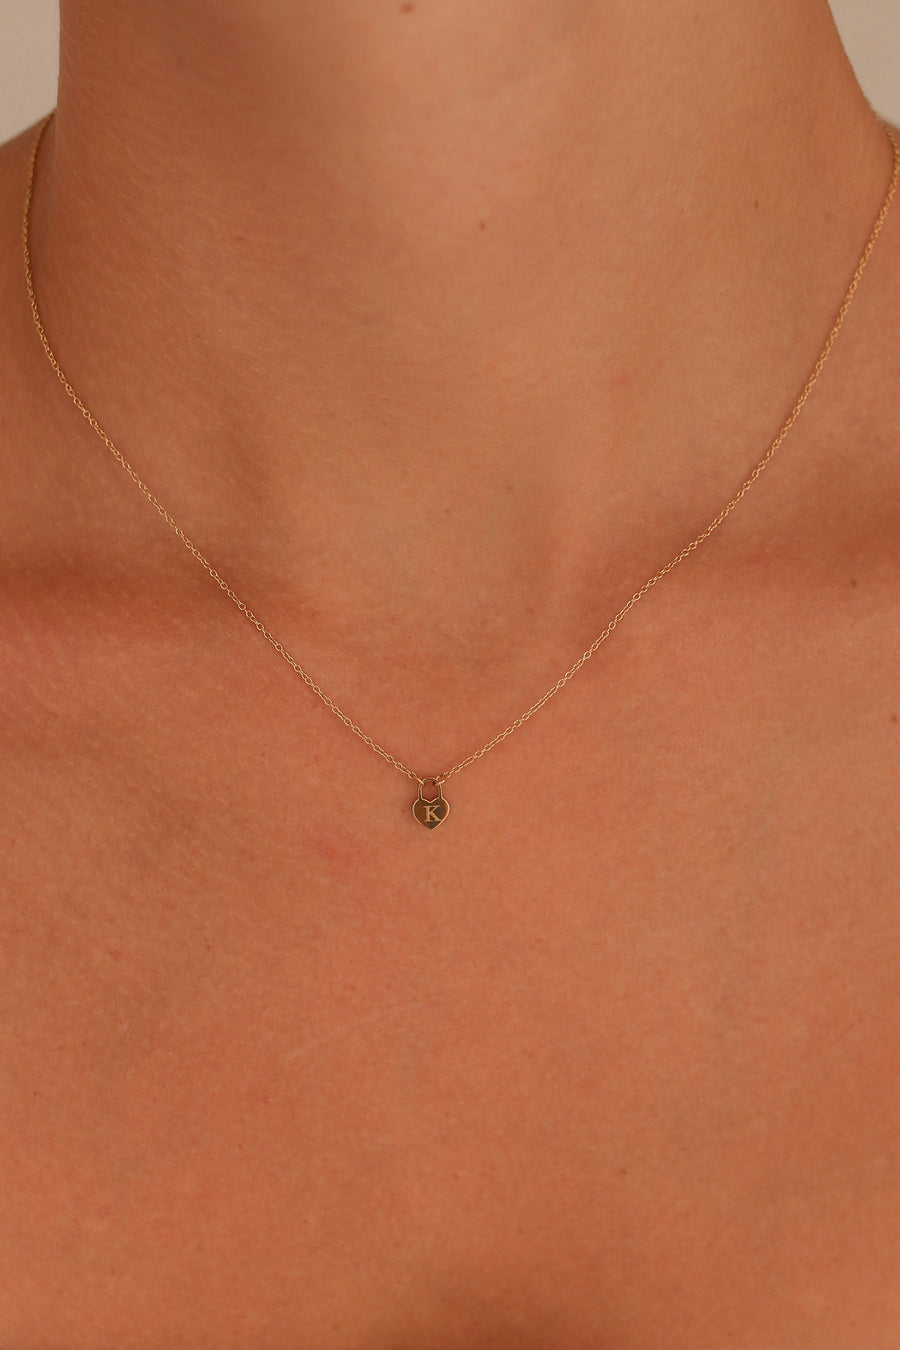 Ellie - Stainless Steel Gold or Silver Necklace